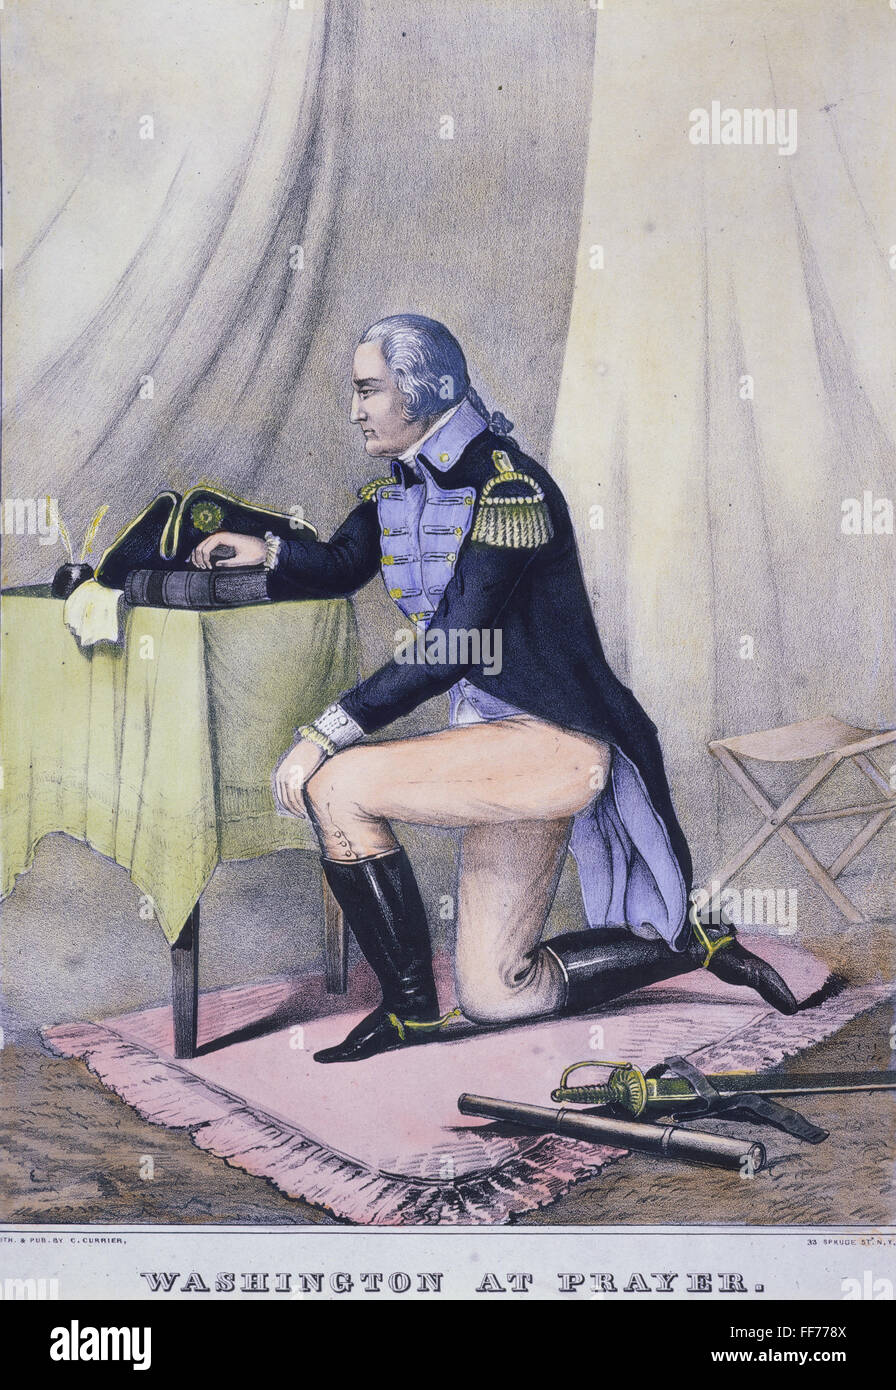 WASHINGTON'S PRAYER, 1777. /nGeorge Washington at prayer at Valley Forge. Lithograph by Charles Currier. Stock Photo